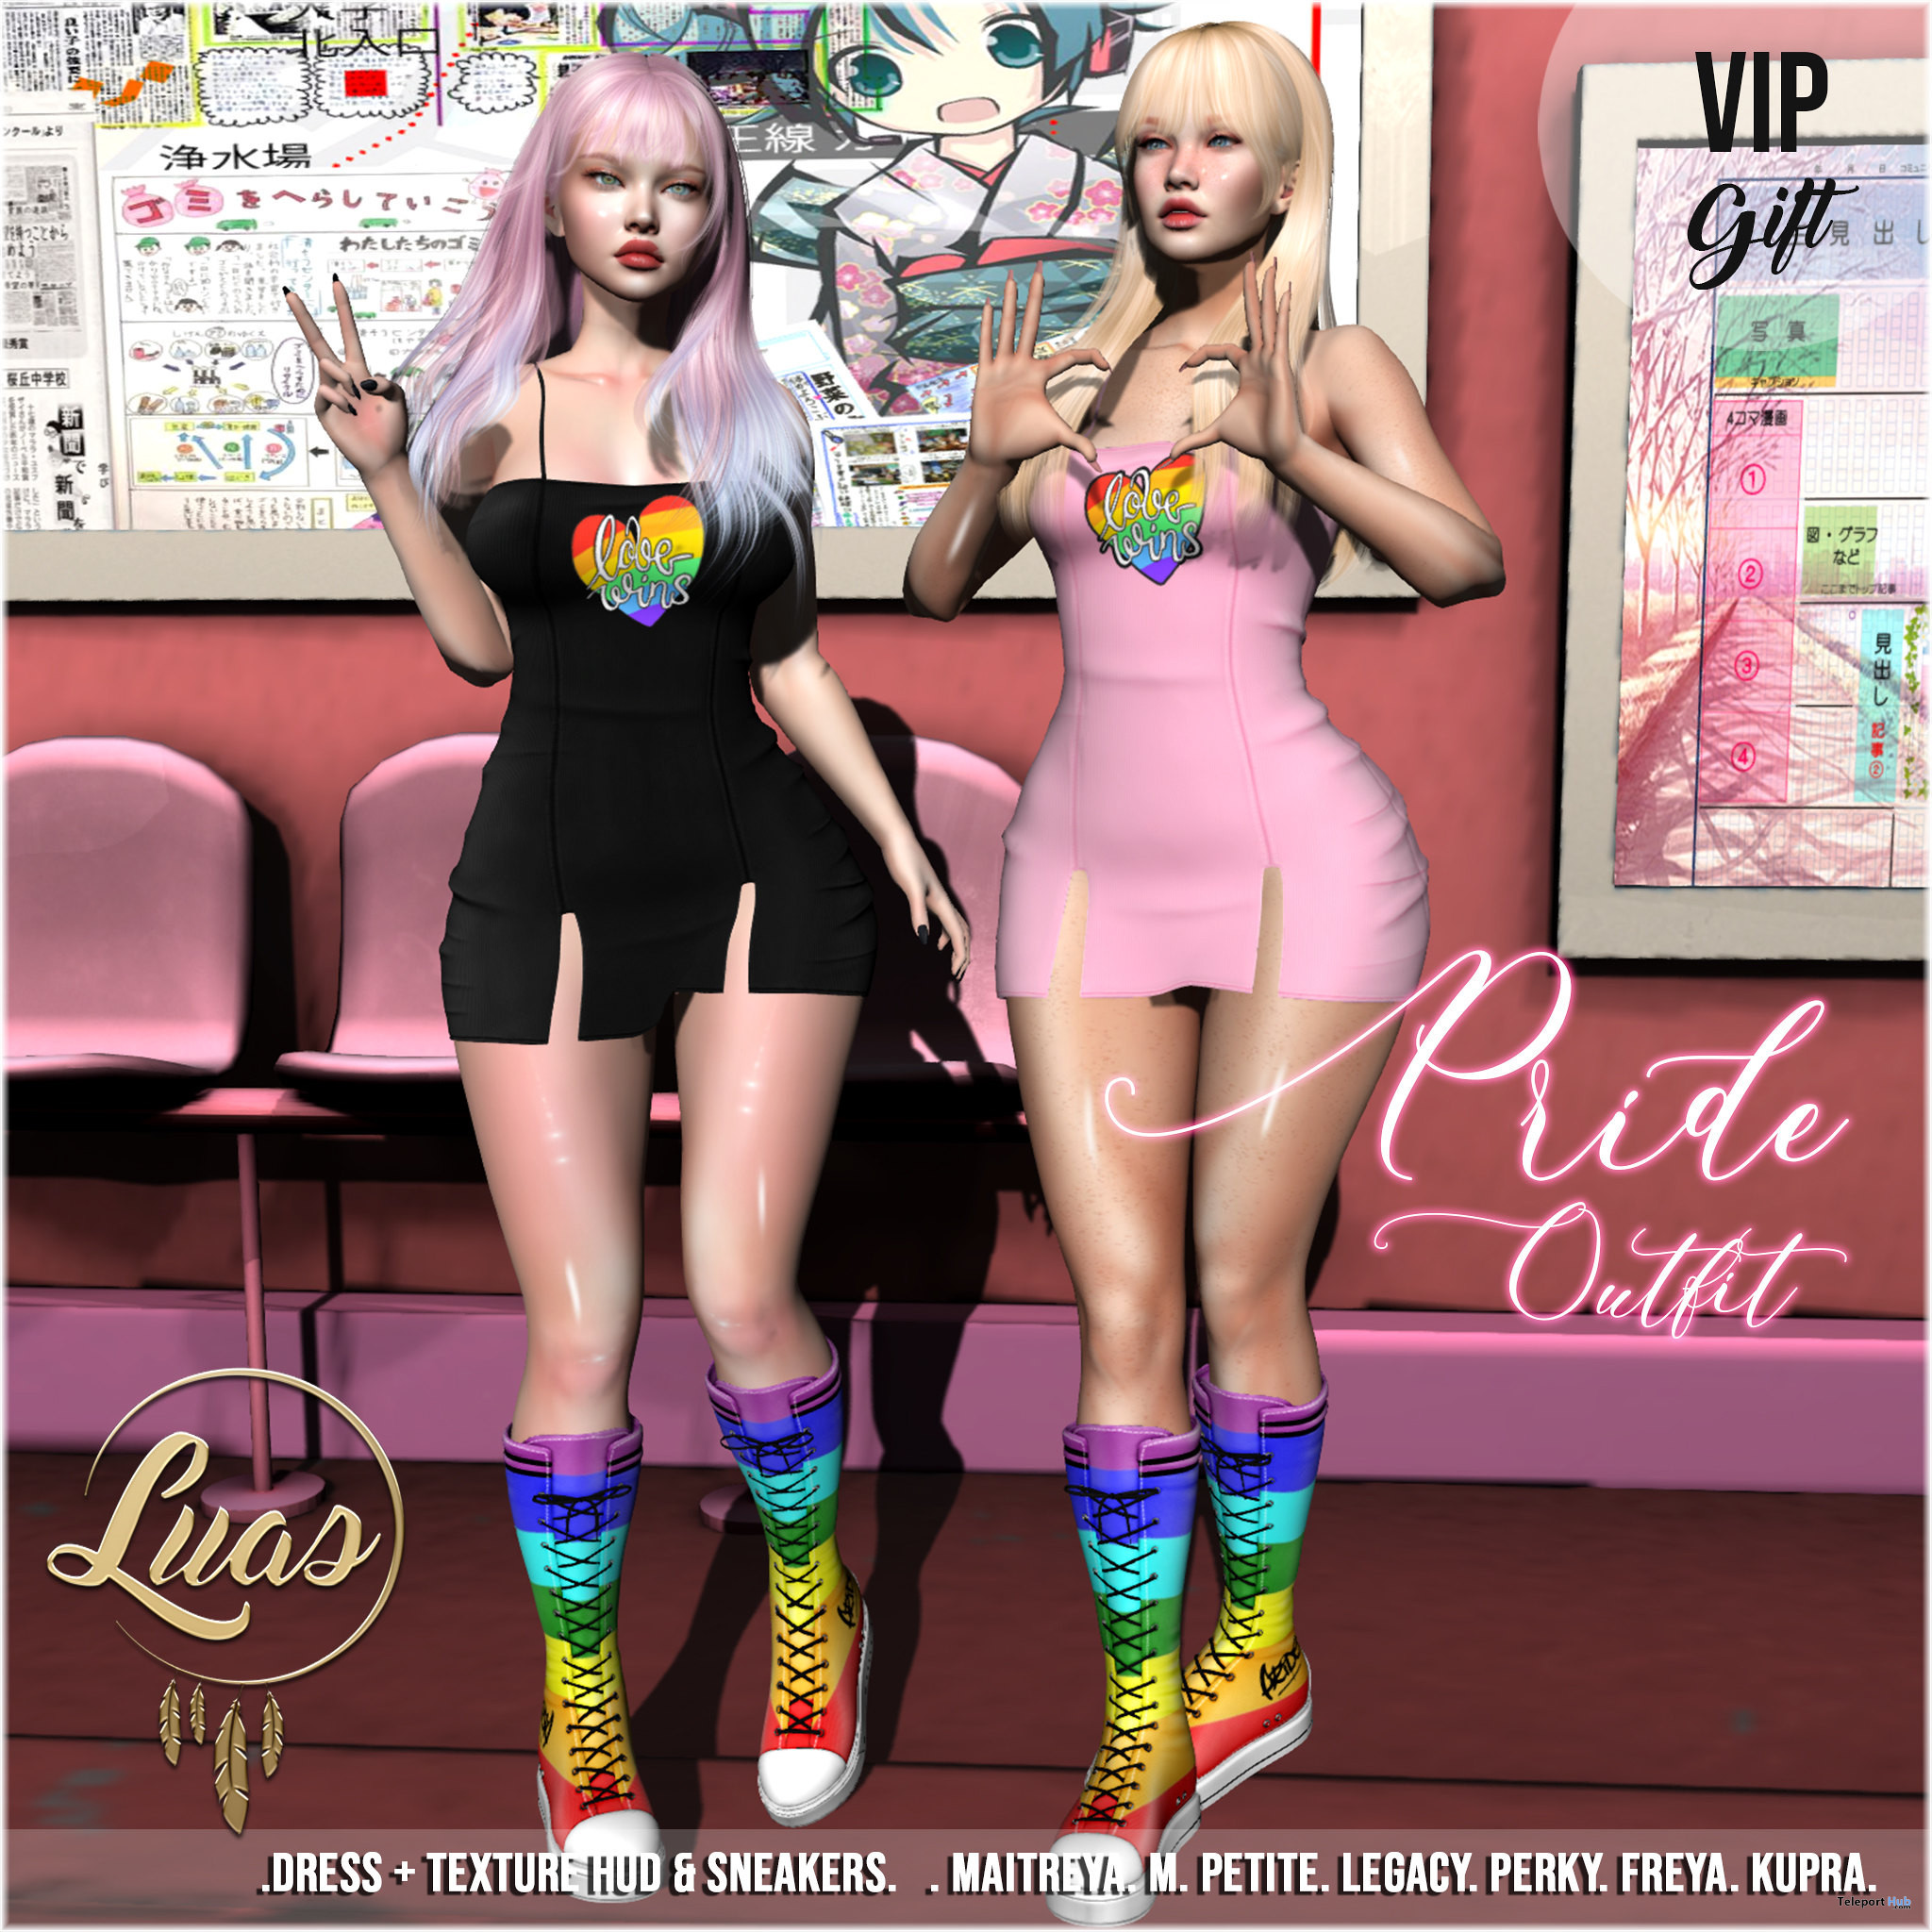 Pride Outfit June 2021 Group Gift by Luas - Teleport Hub - teleporthub.com